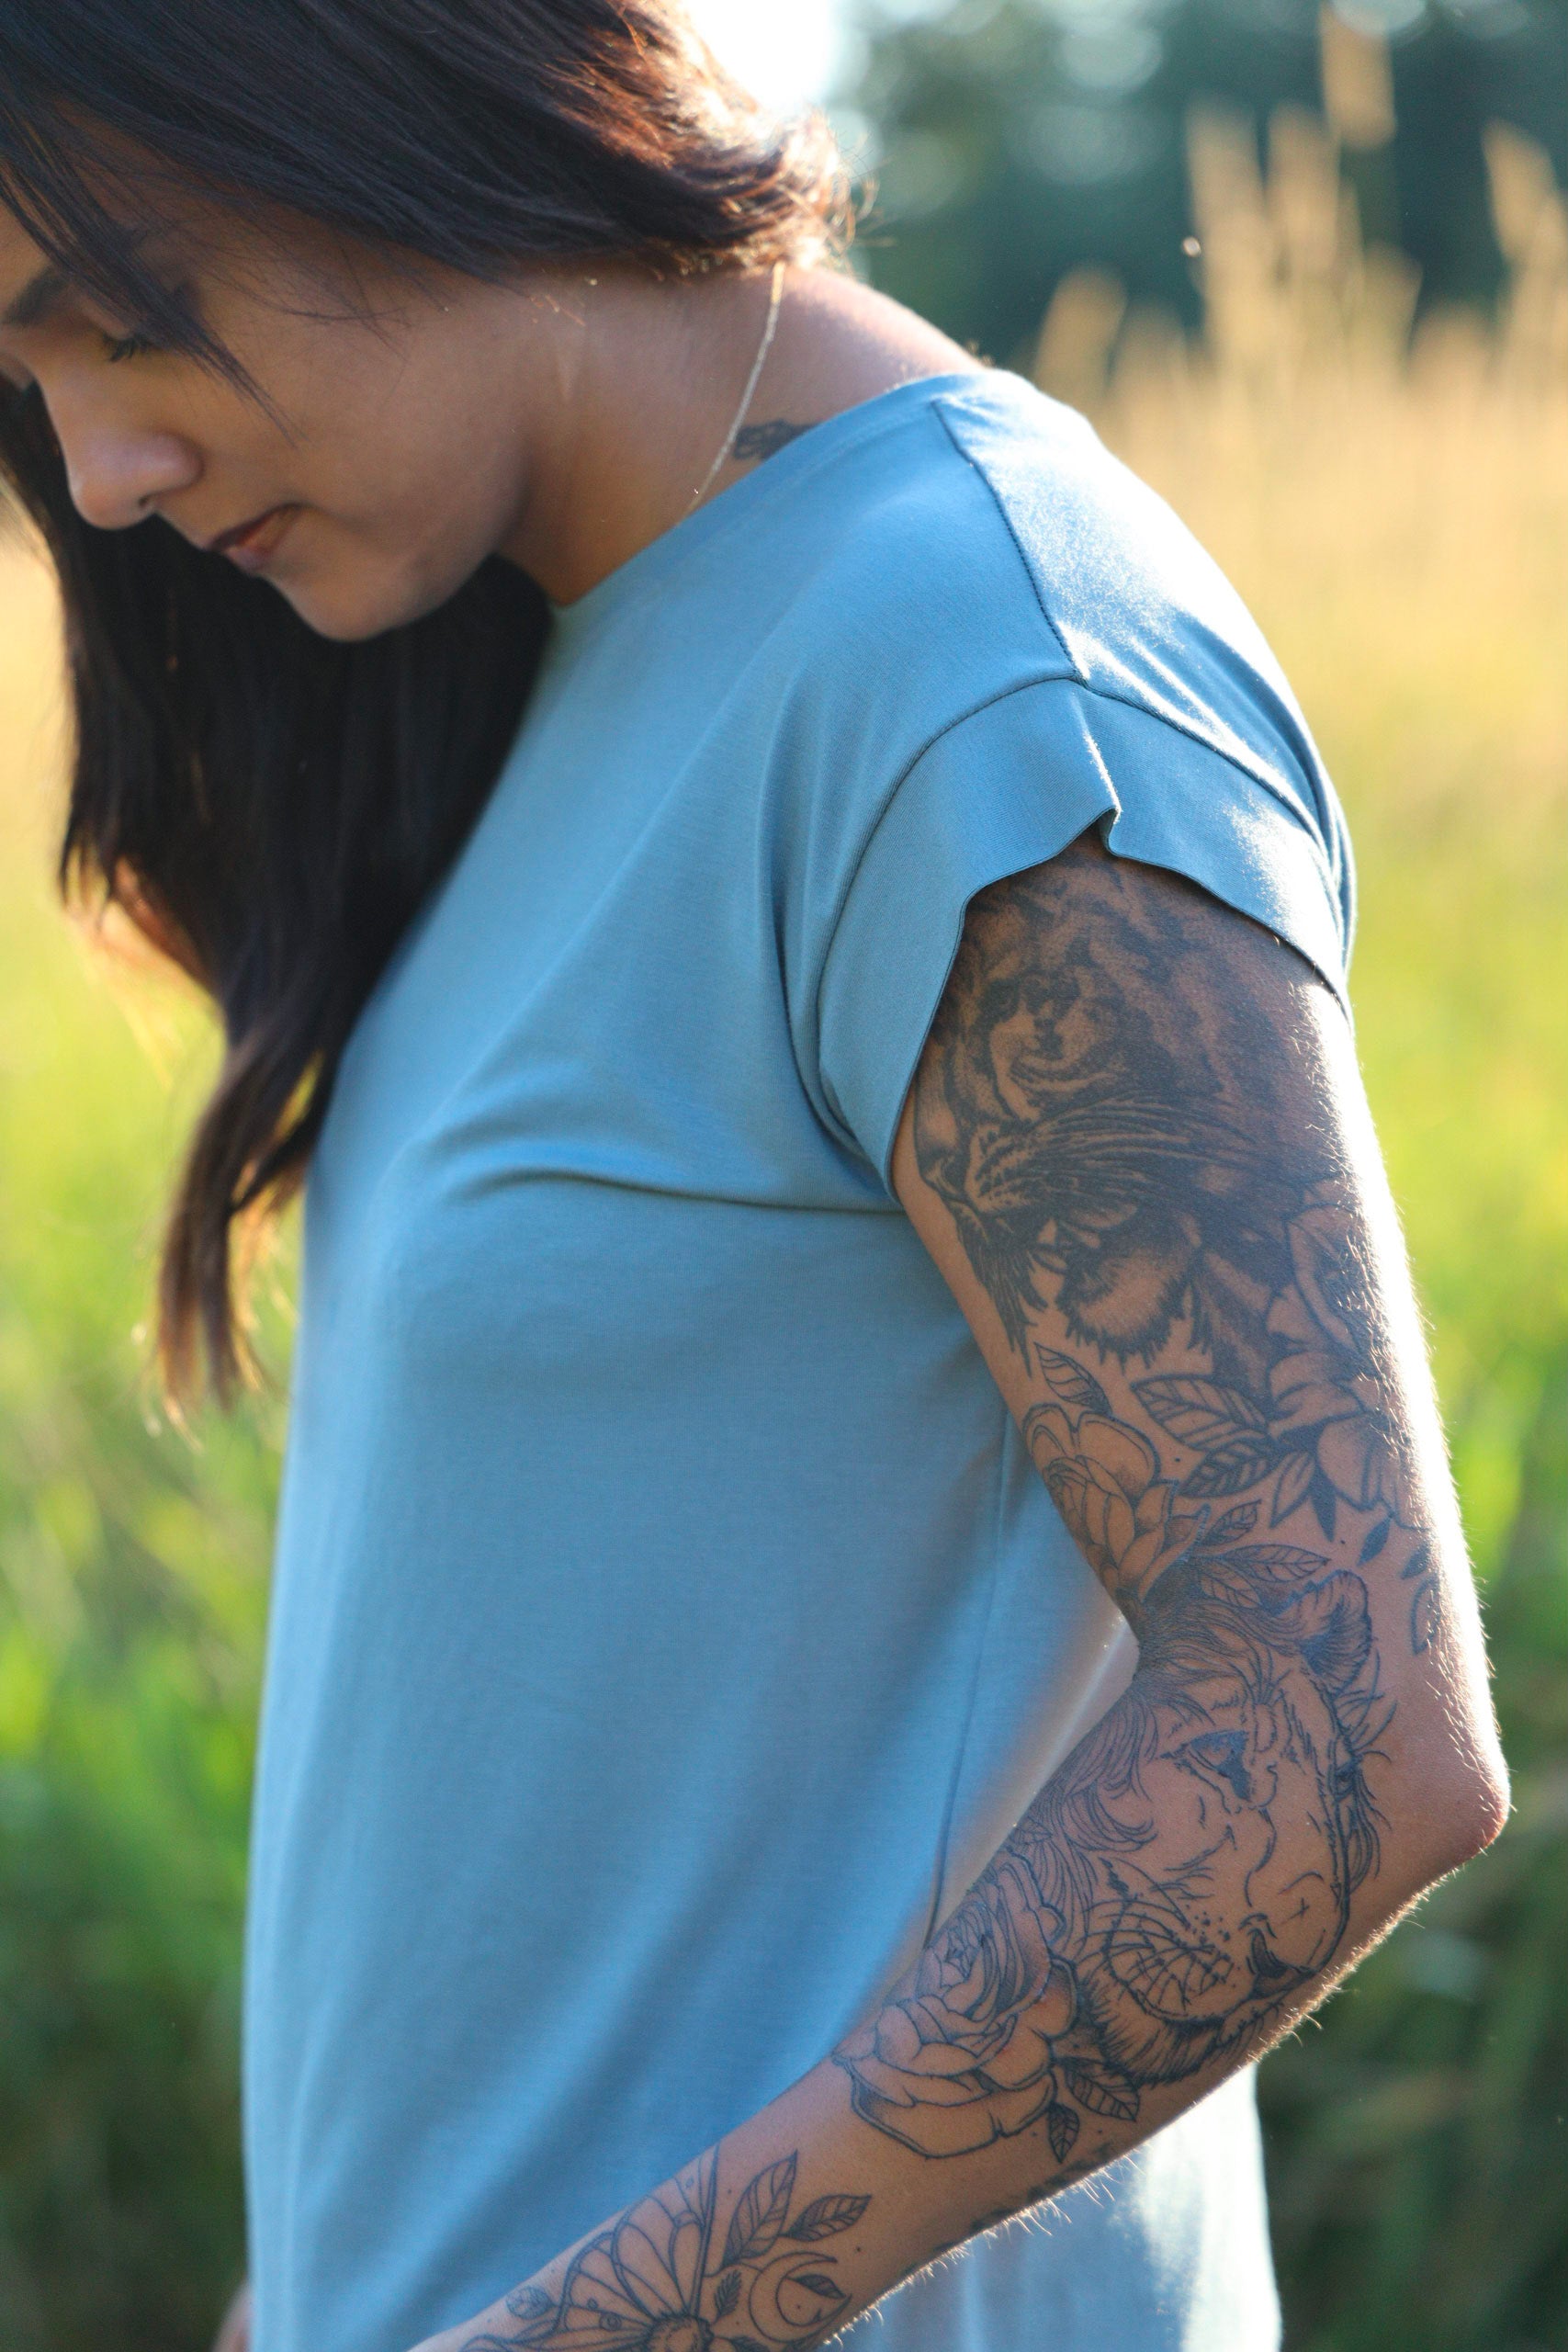 The Short Sleeve - Flow Top - Bamboo